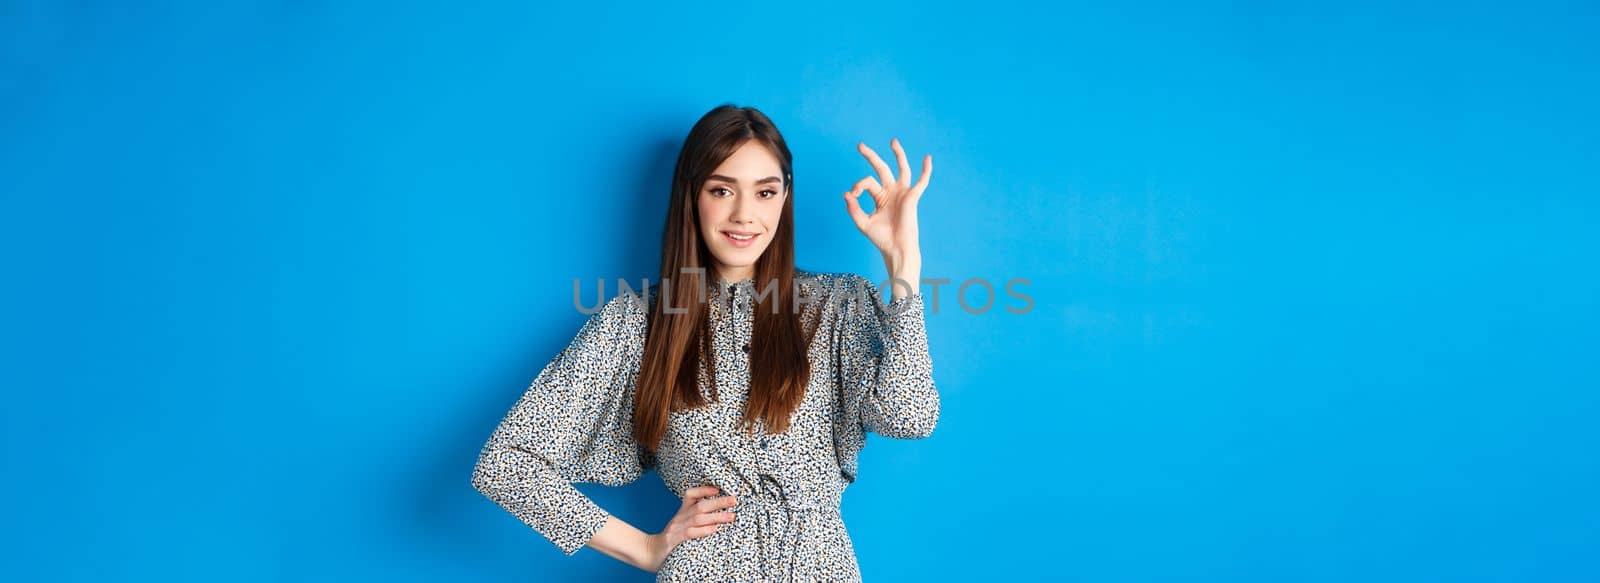 Confident young woman in dress showing okay sign and smiling, no problem gesture, assure everything good, standing on blue background.